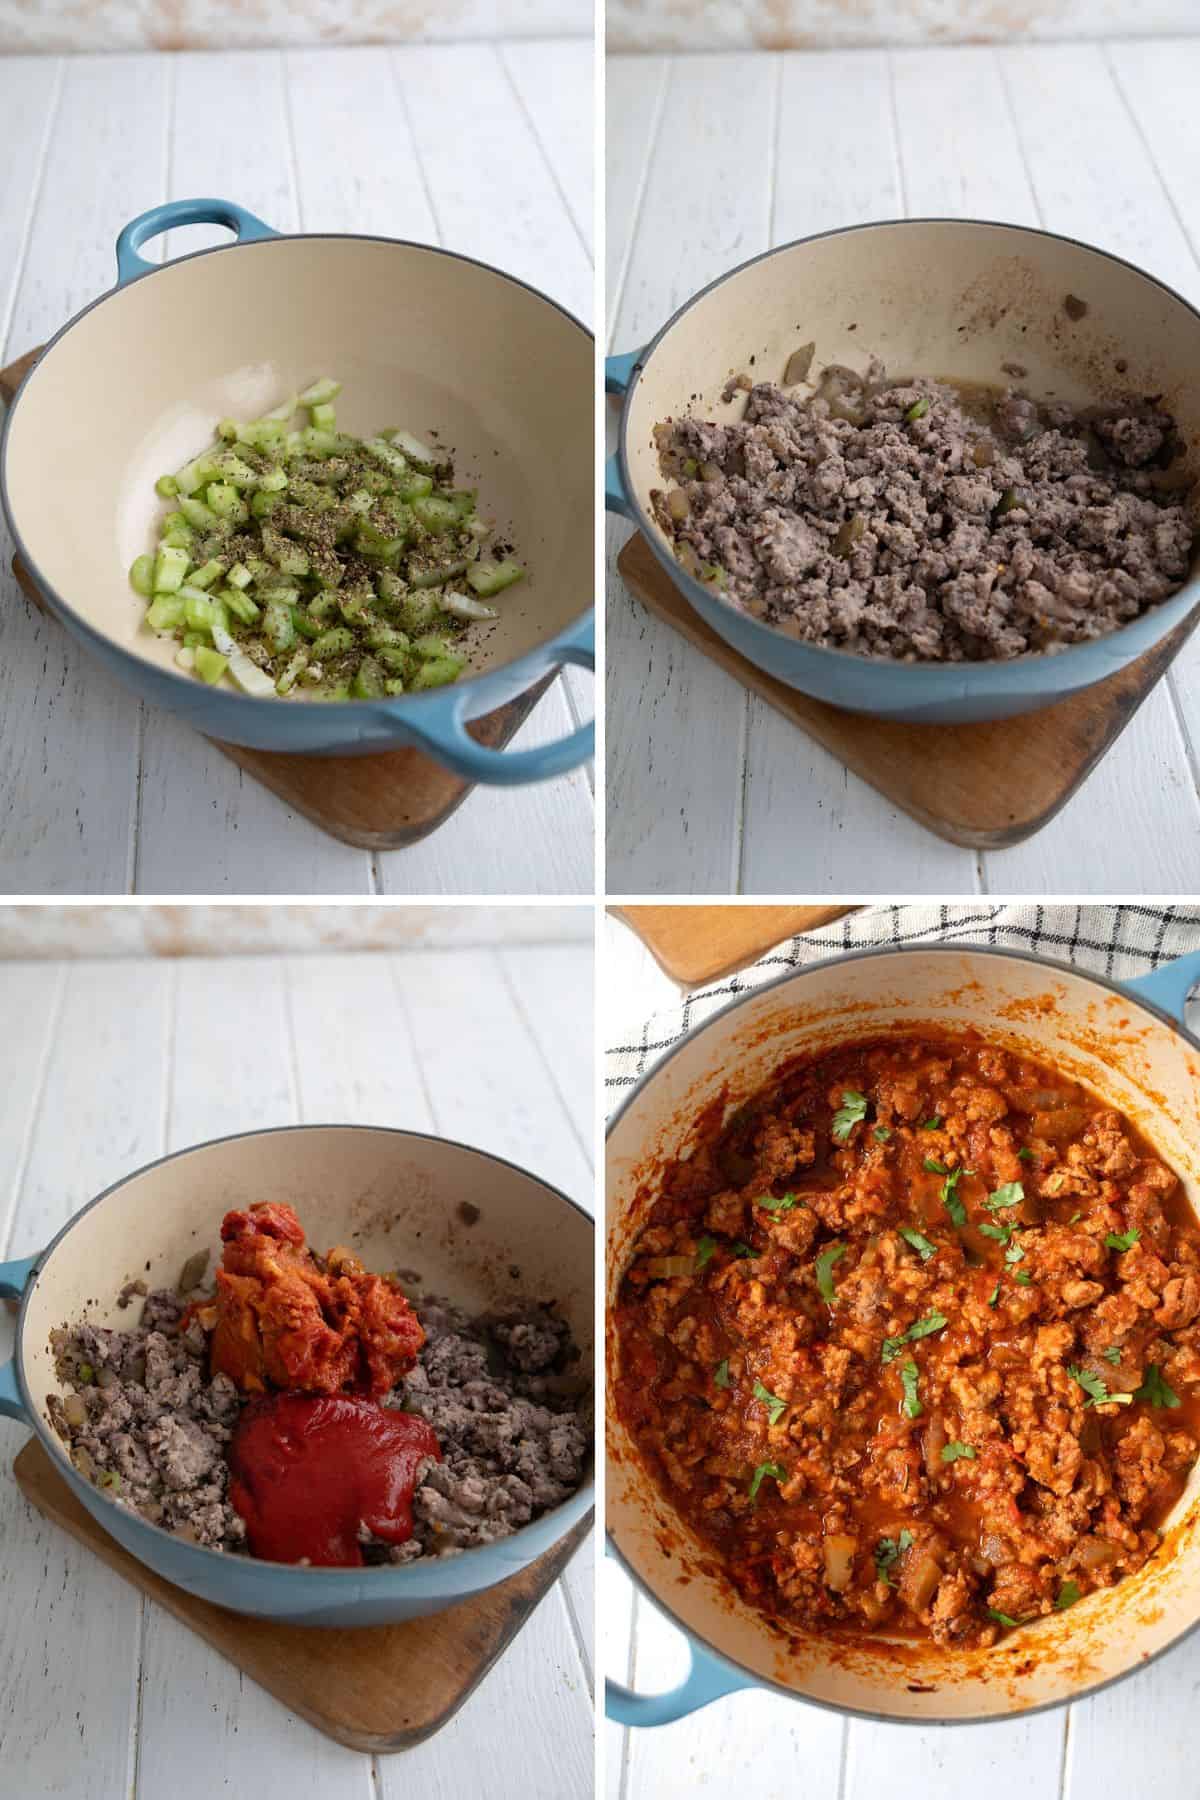 A collage of 4 images showing the steps for making Turkey Ragu.